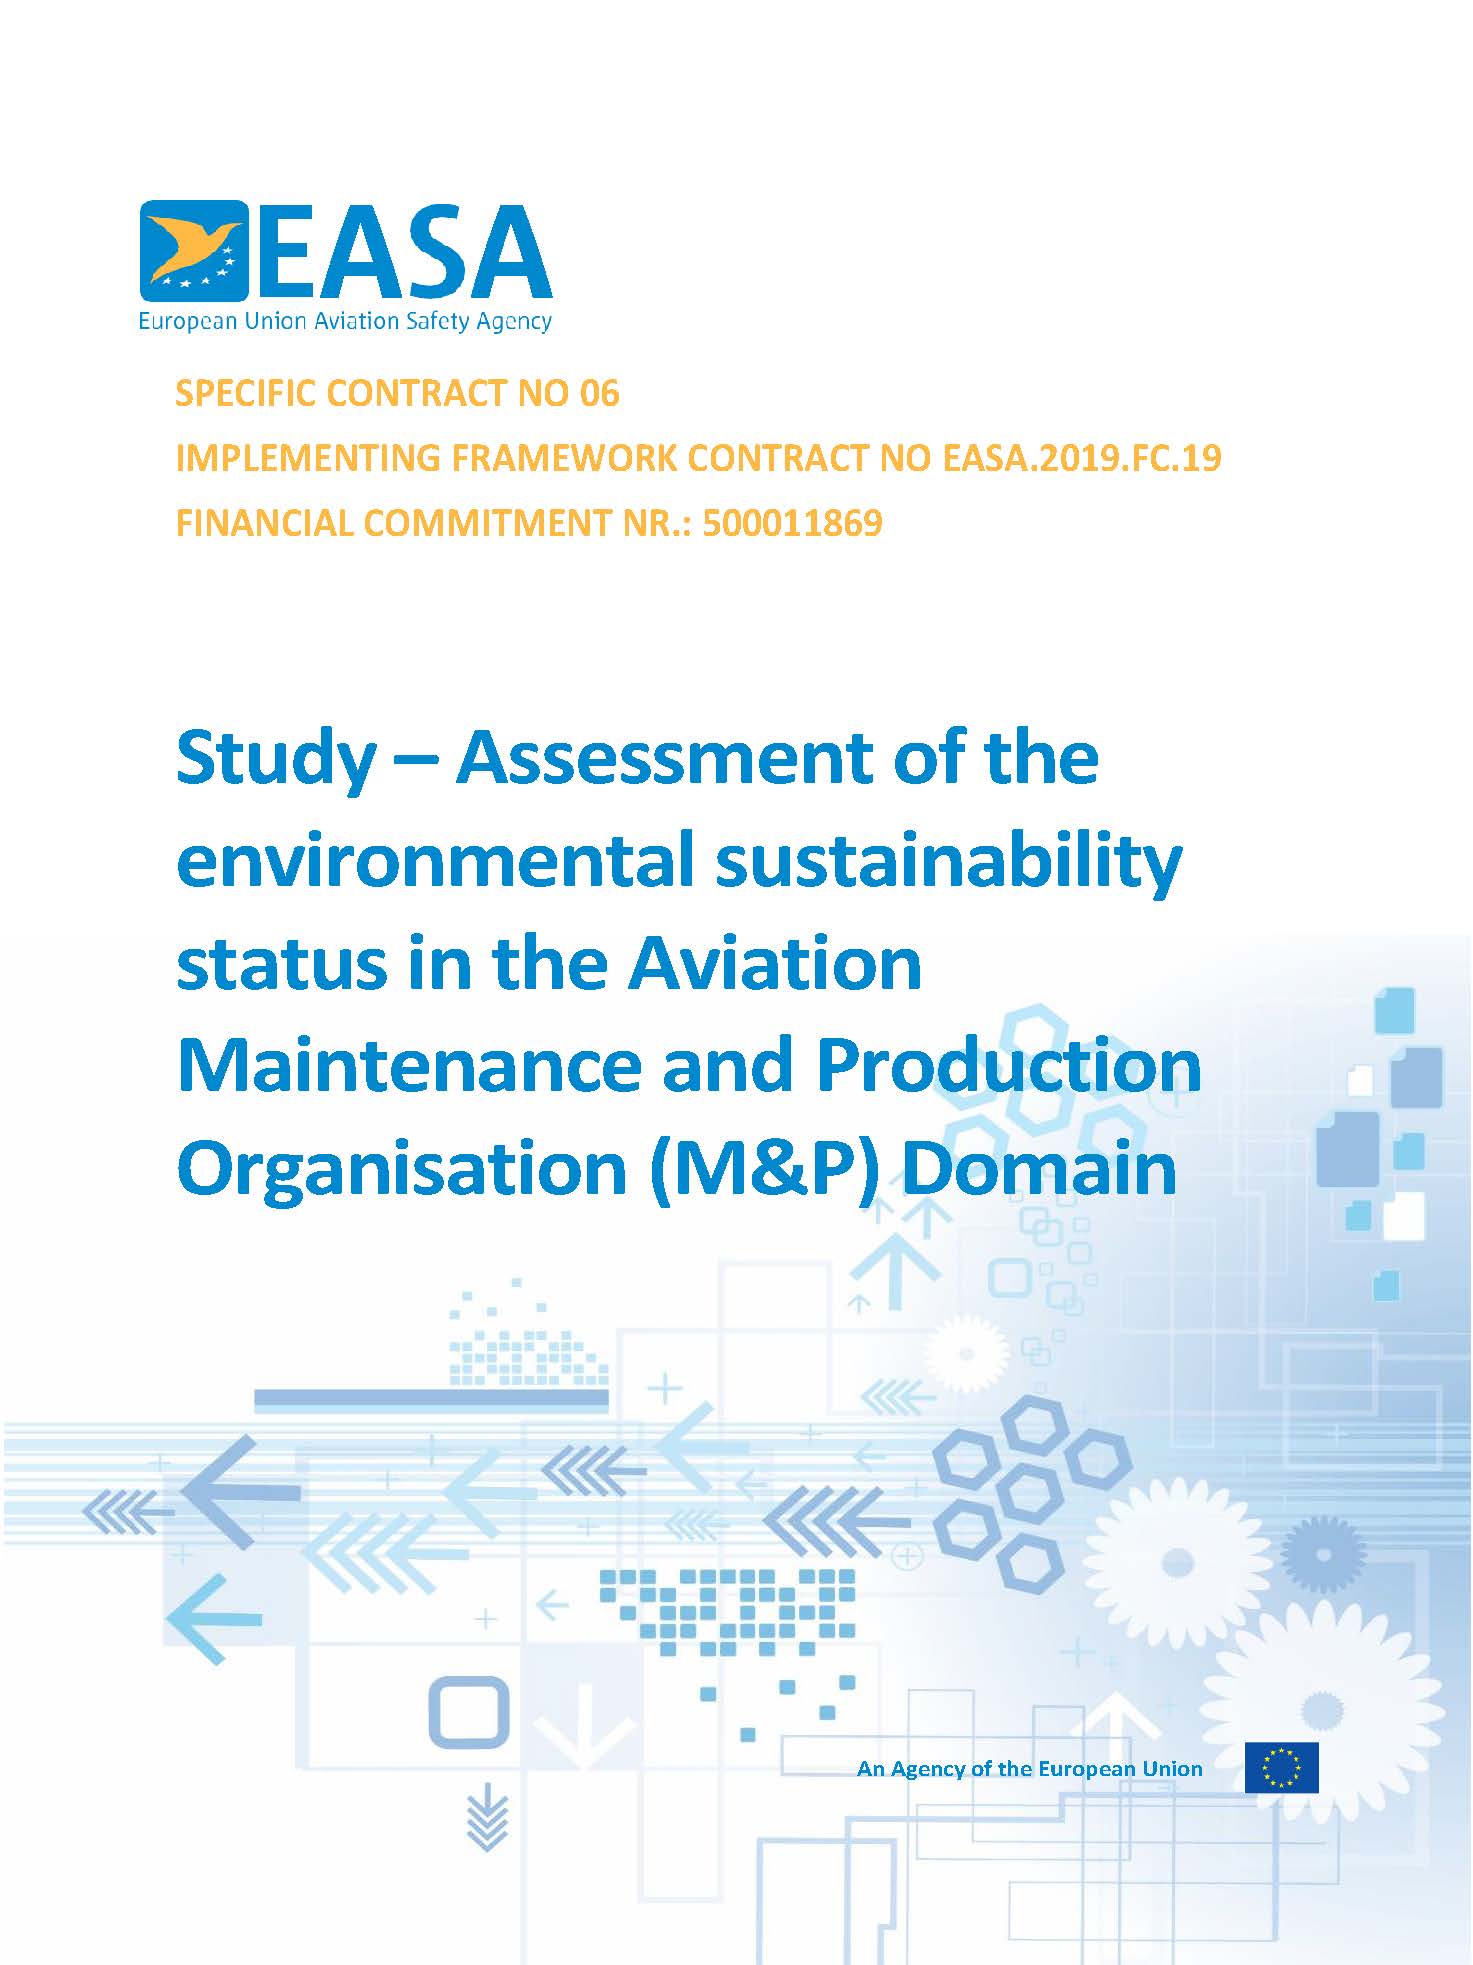 Environmental sustainability status in the Aviation Maintenance and Production Organisation (M&P) Domain